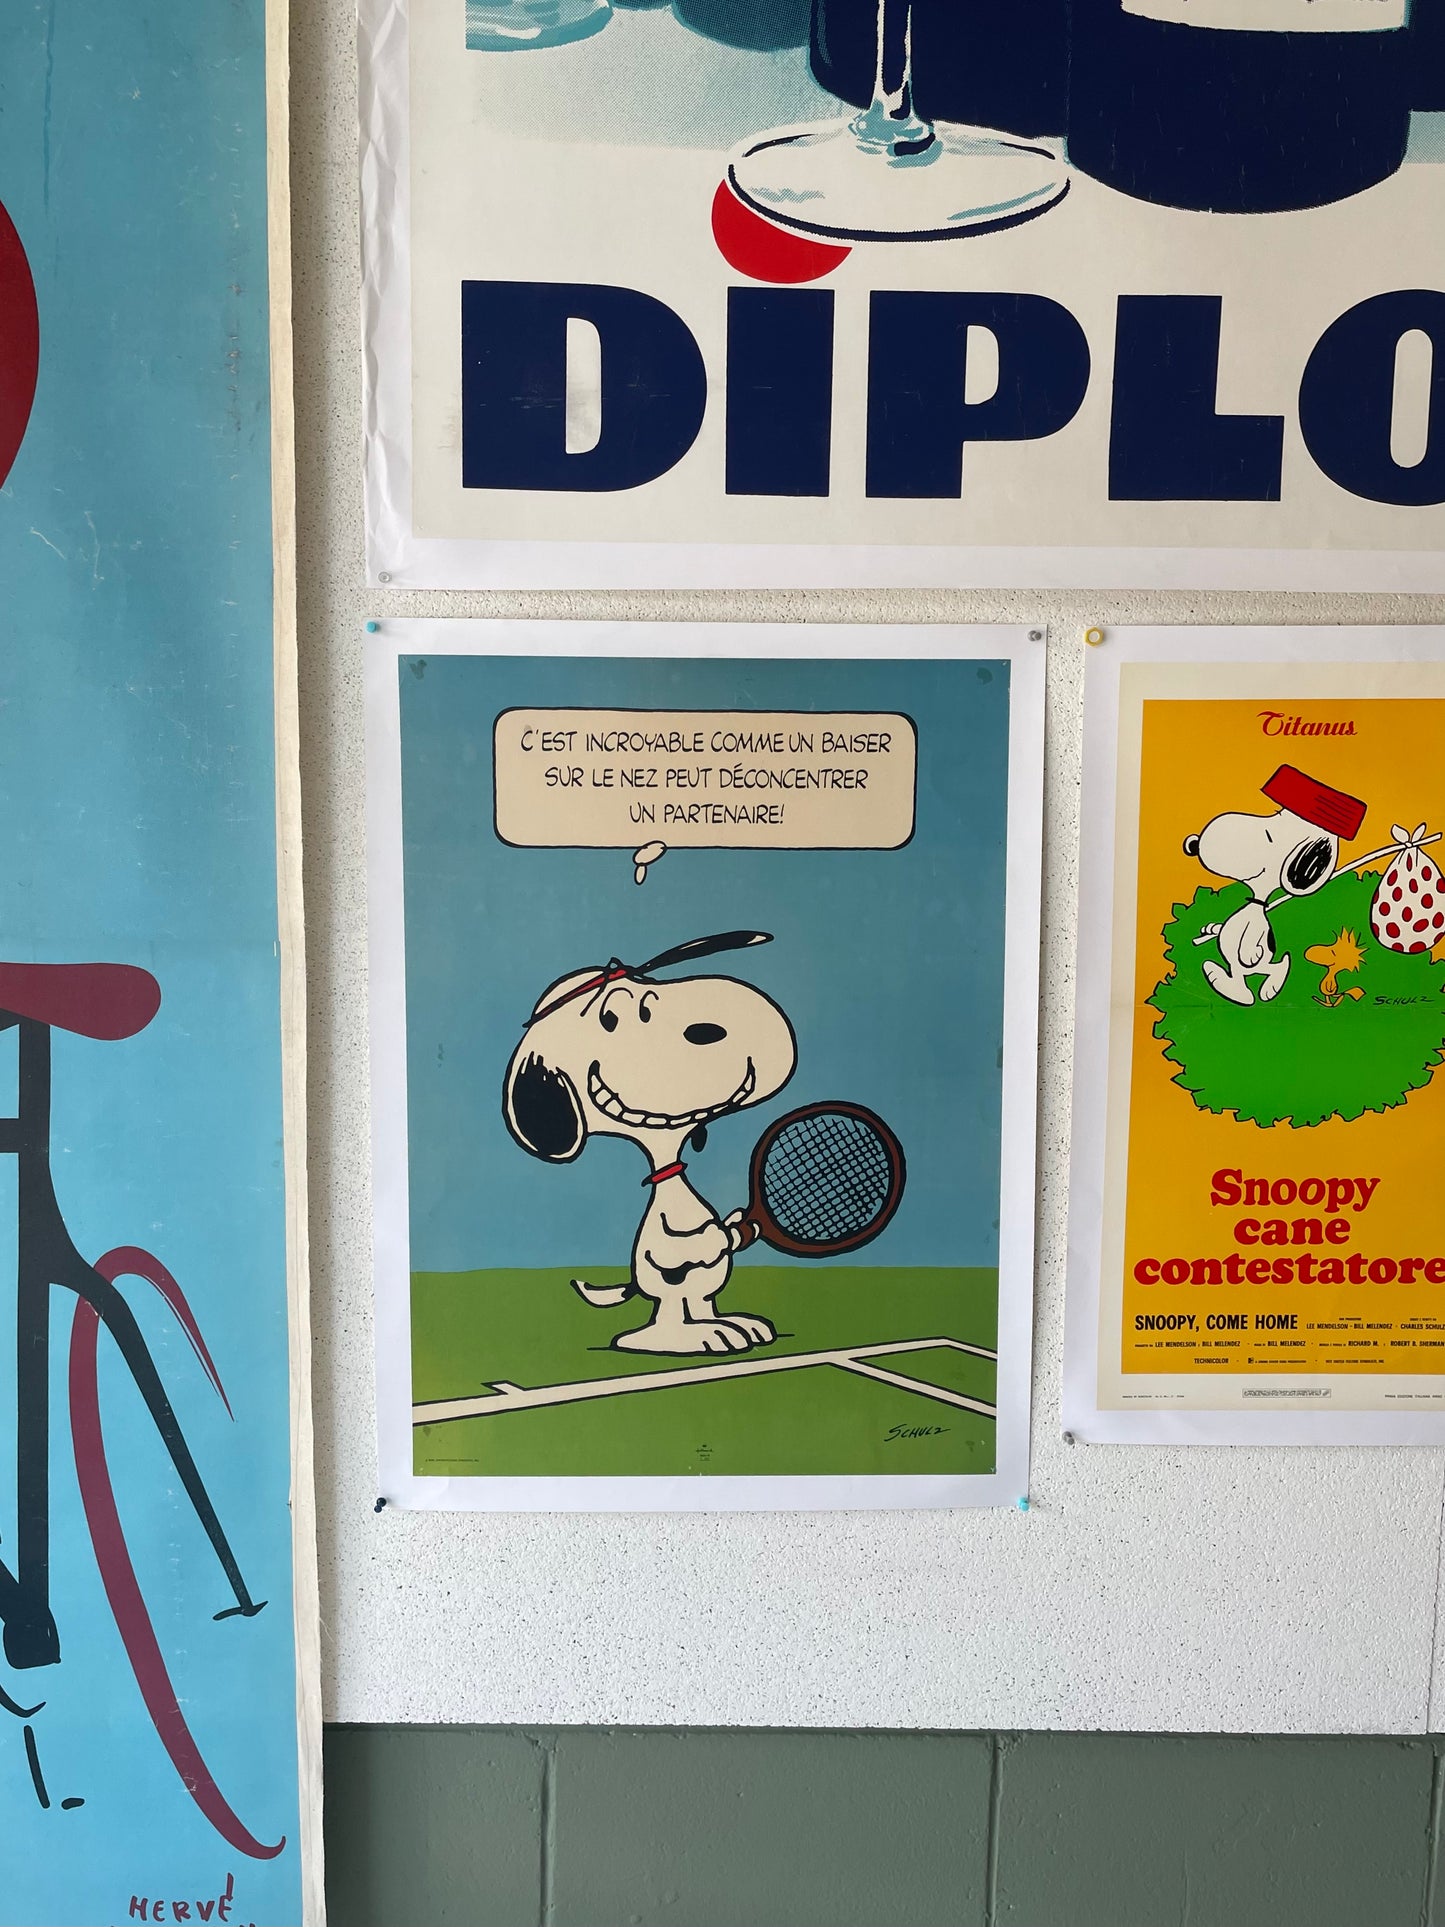 Snoopy Tennis Poster by Schulz